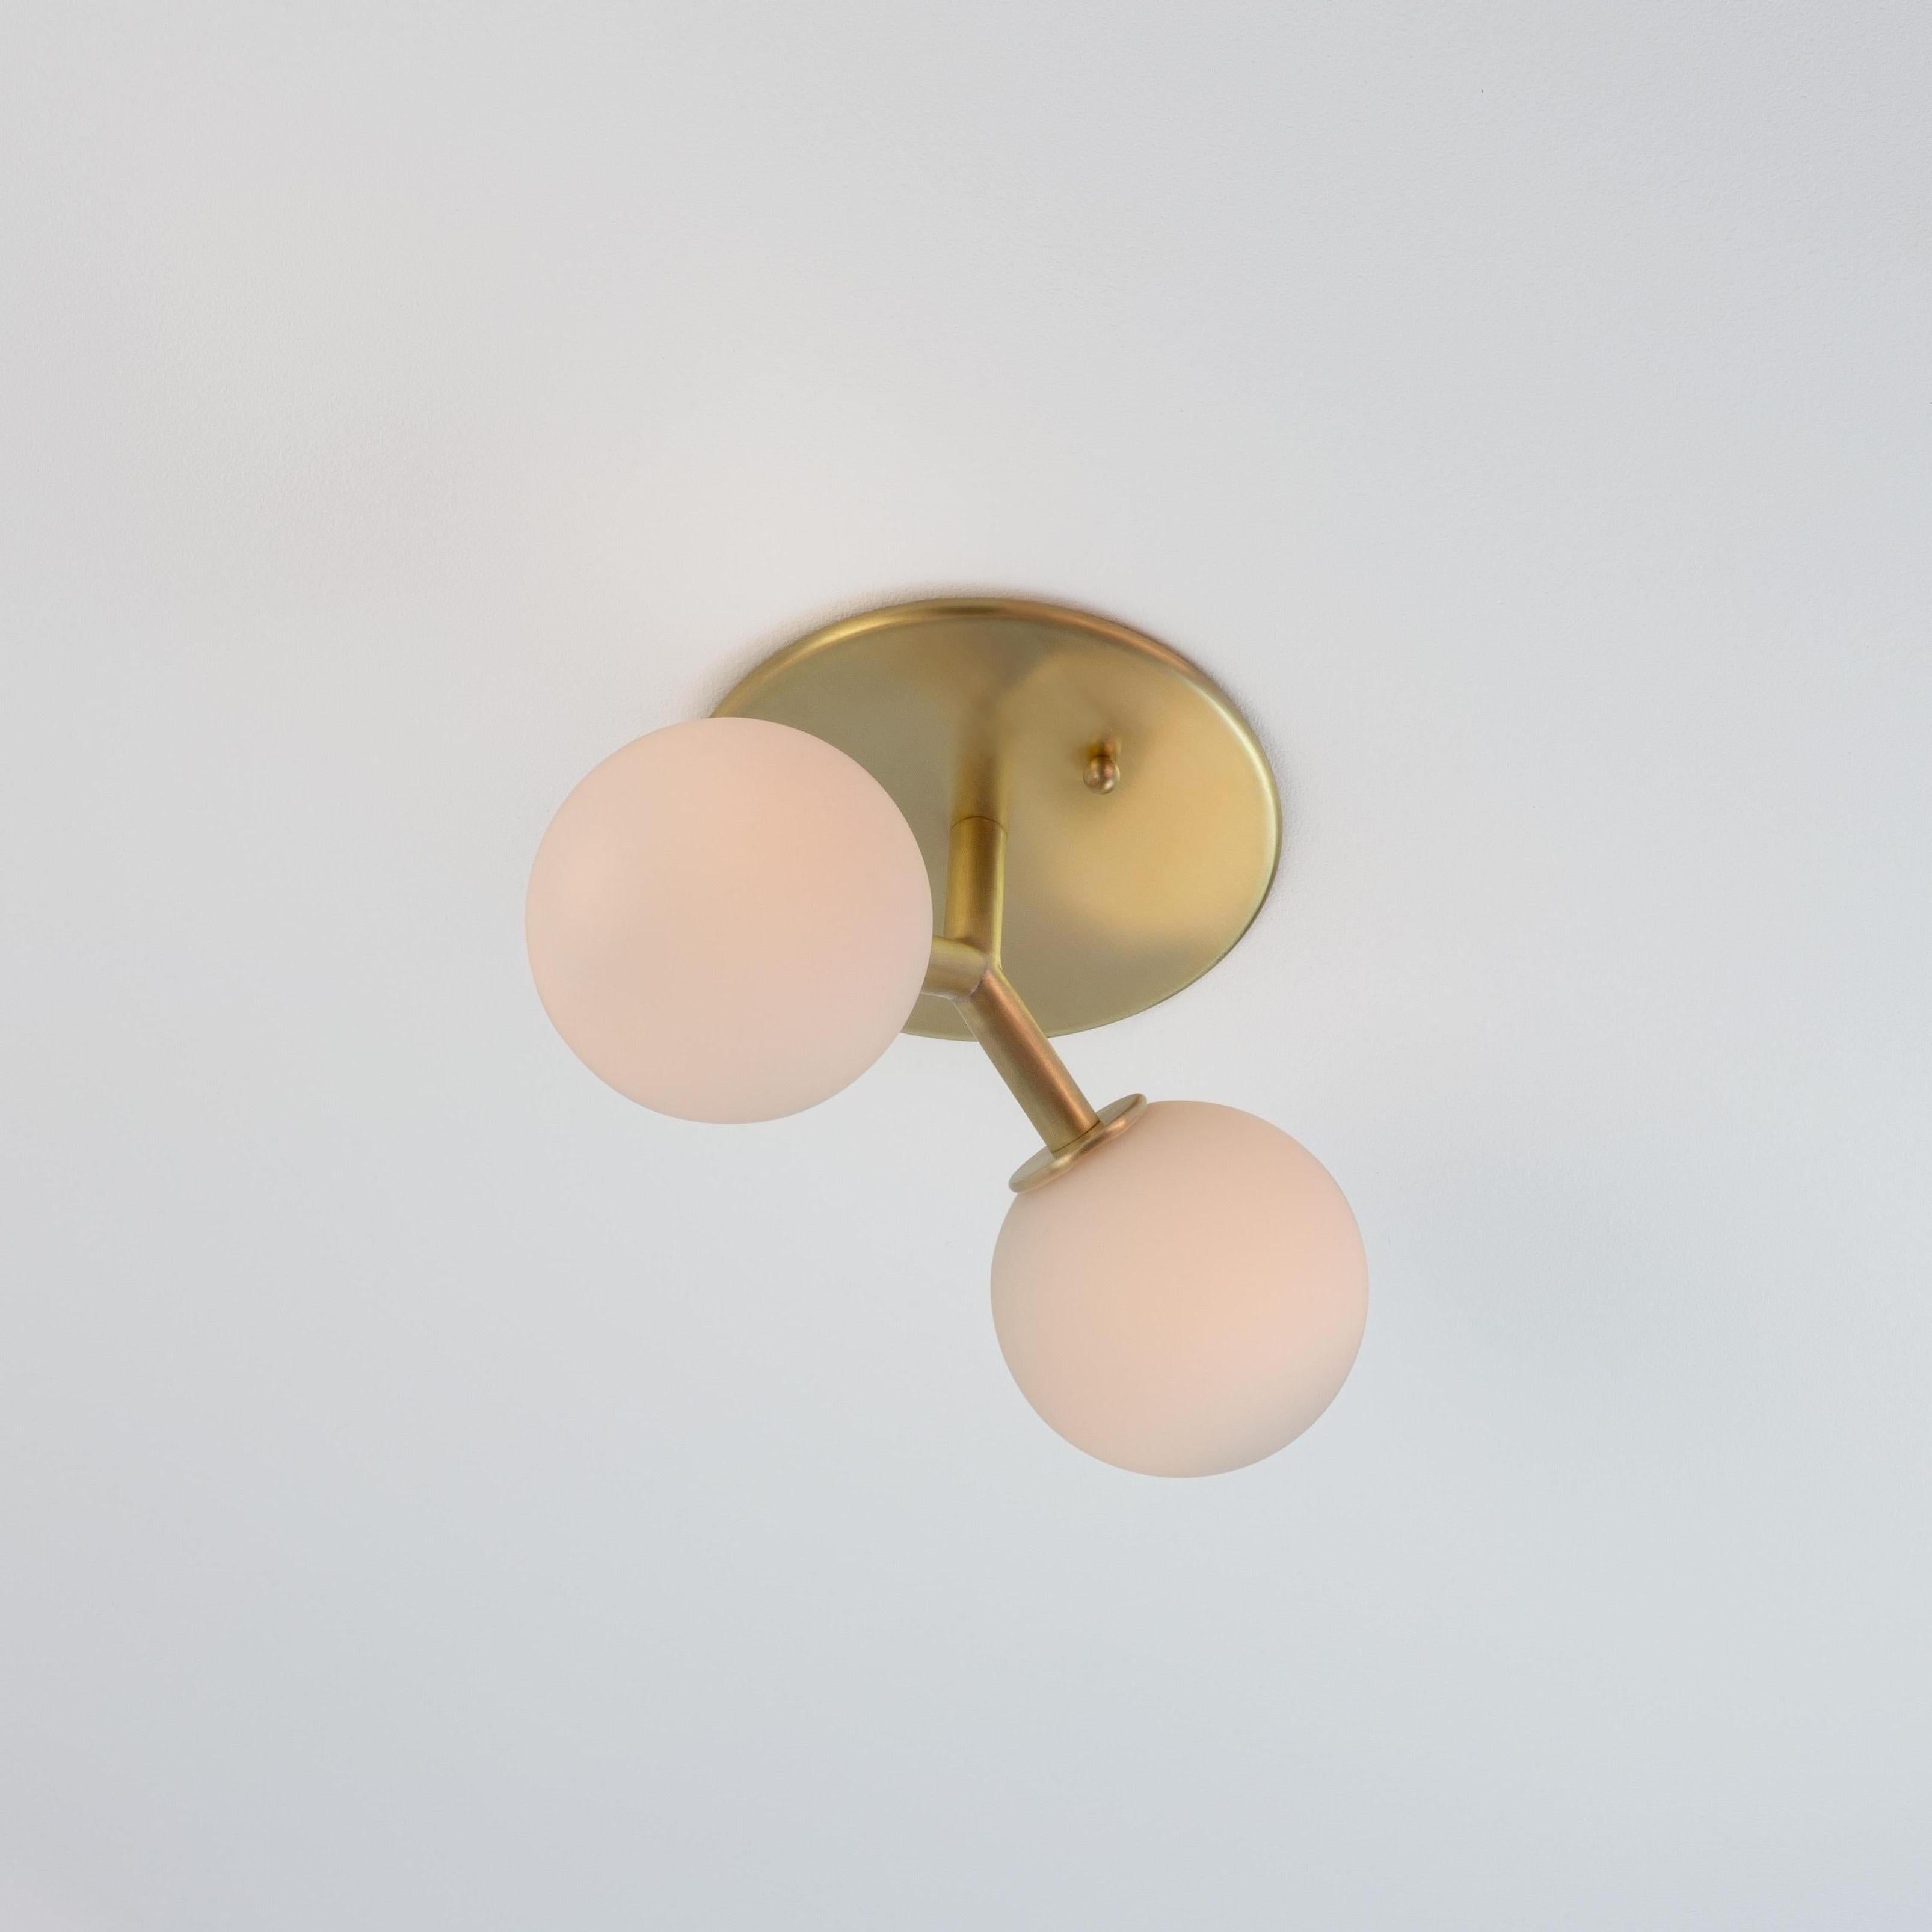 This listing is for 2x Y Flush Mount in Brass designed and manufactured by Research Lighting.

Materials: Brass & Glass
Finish: Raw Brushed Brass 
Electronics (per fixture): 2x G9 Sockets, 2x 2.5 Watt LED Bulbs (included), 500 Lumens total
UL